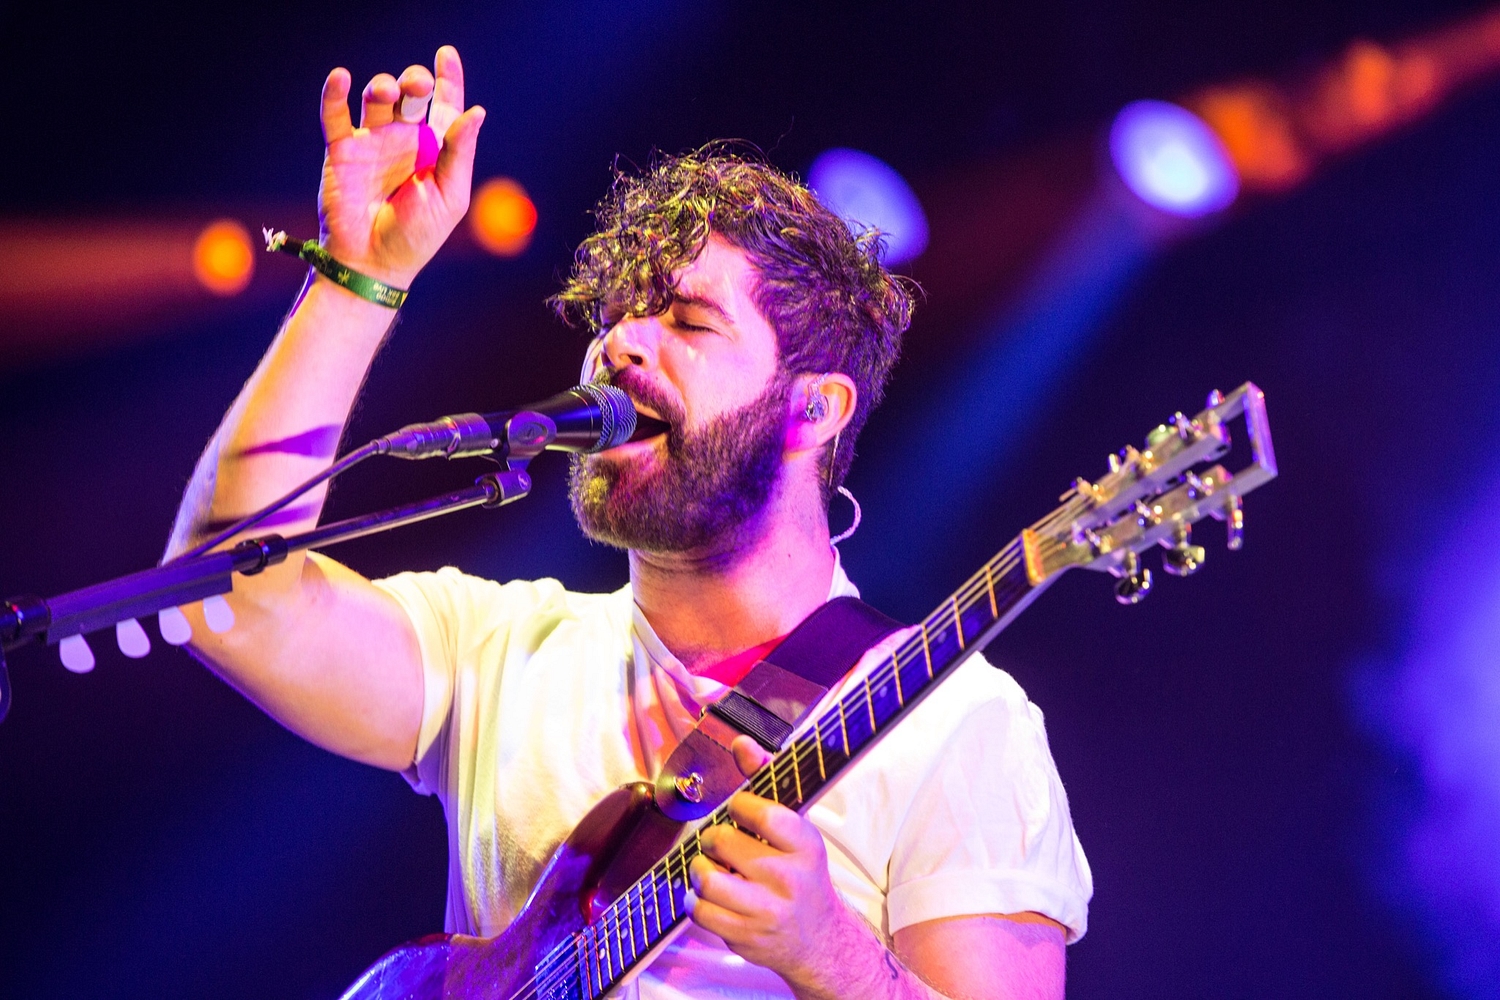 Foals, Savages and more added to the Mad Cool Festival line-up